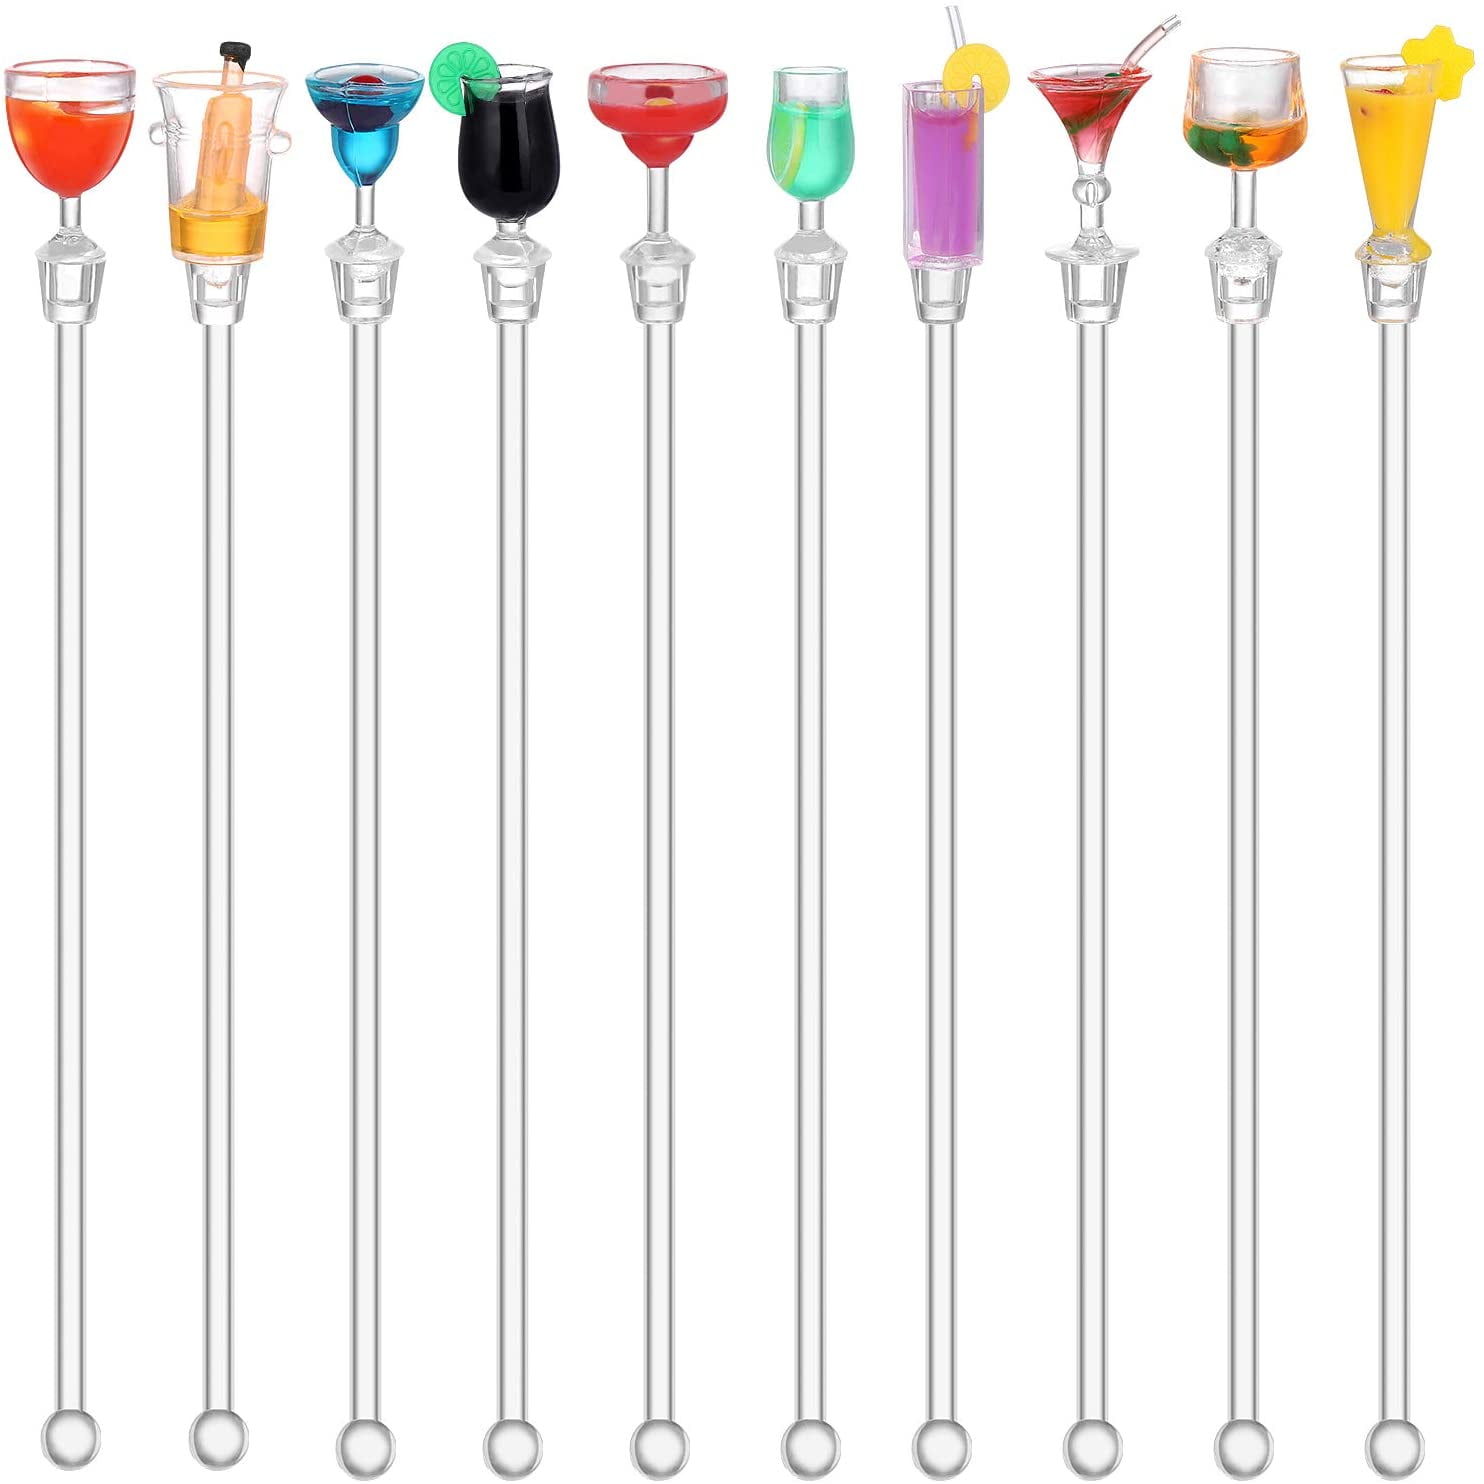 10Pcs Cocktail Drinks Tropical Drink Stirrers Acrylic Cocktail Cute Cocktail Sticks Drink Mixer Bar Stirring Mixing with Colorful Miniature Accessory 